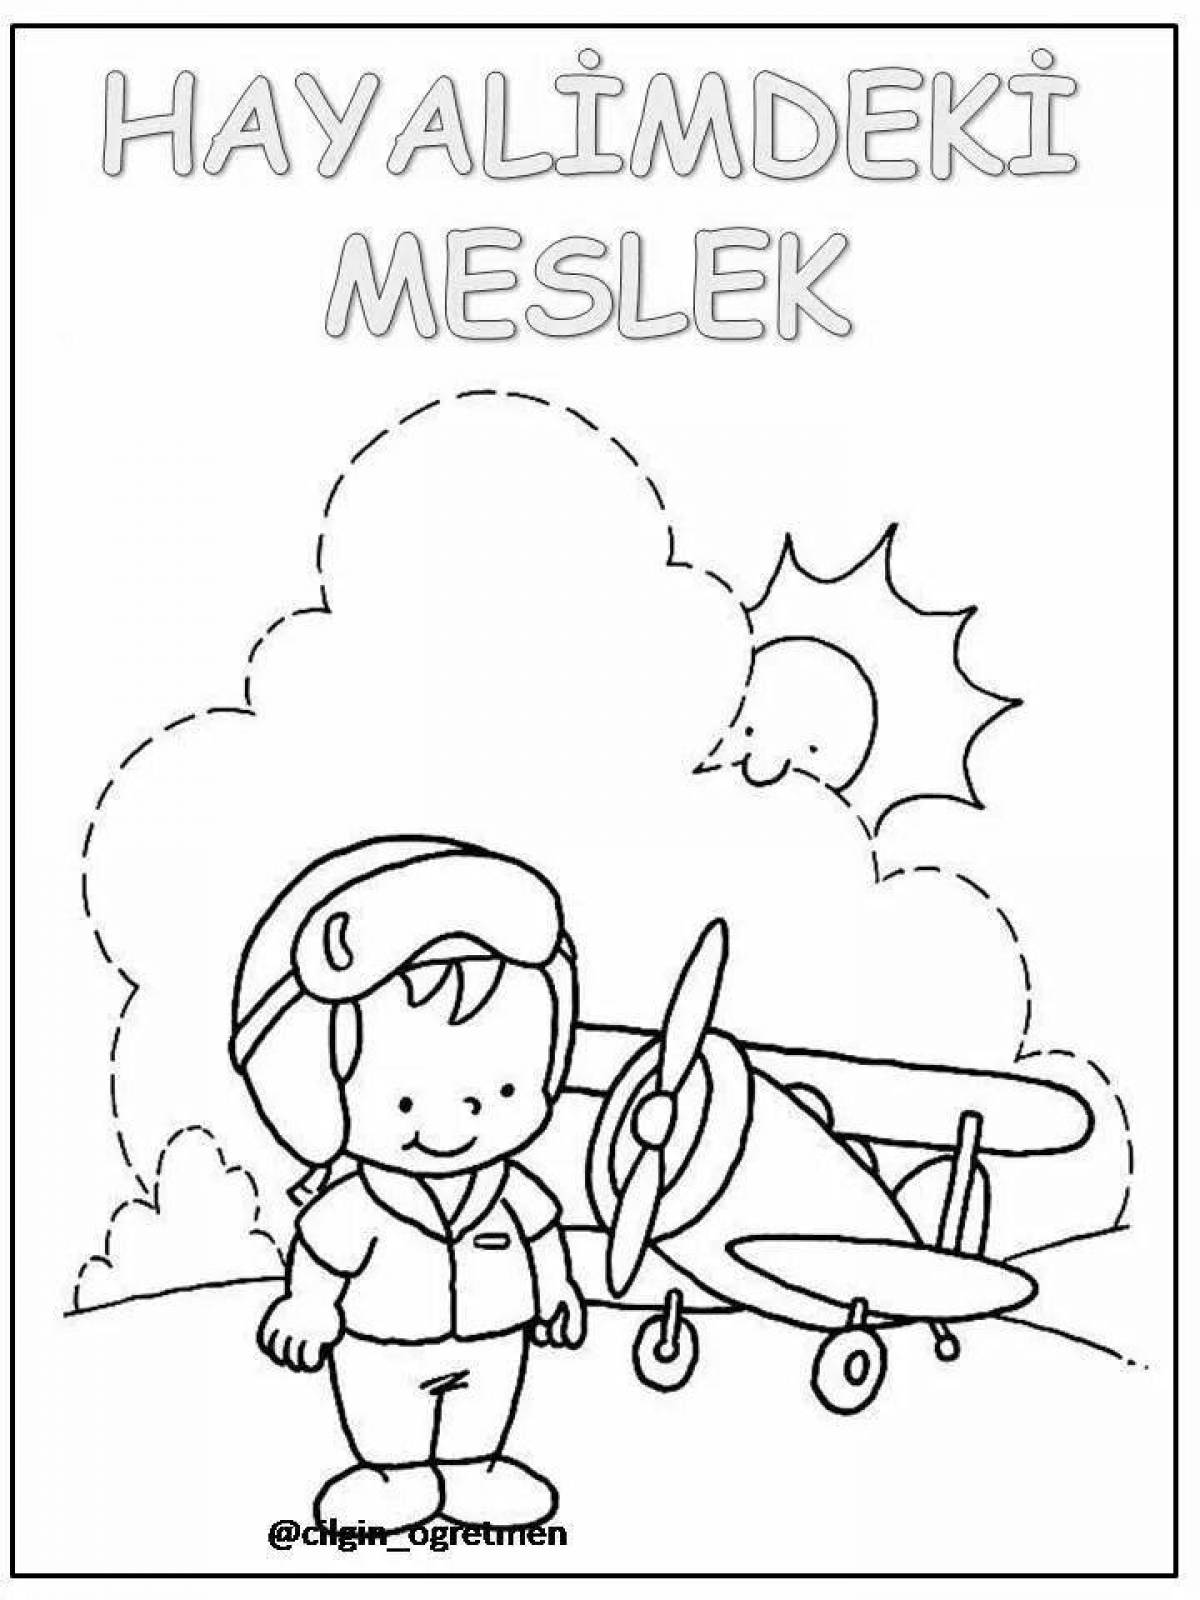 Comic pilot coloring page for kids